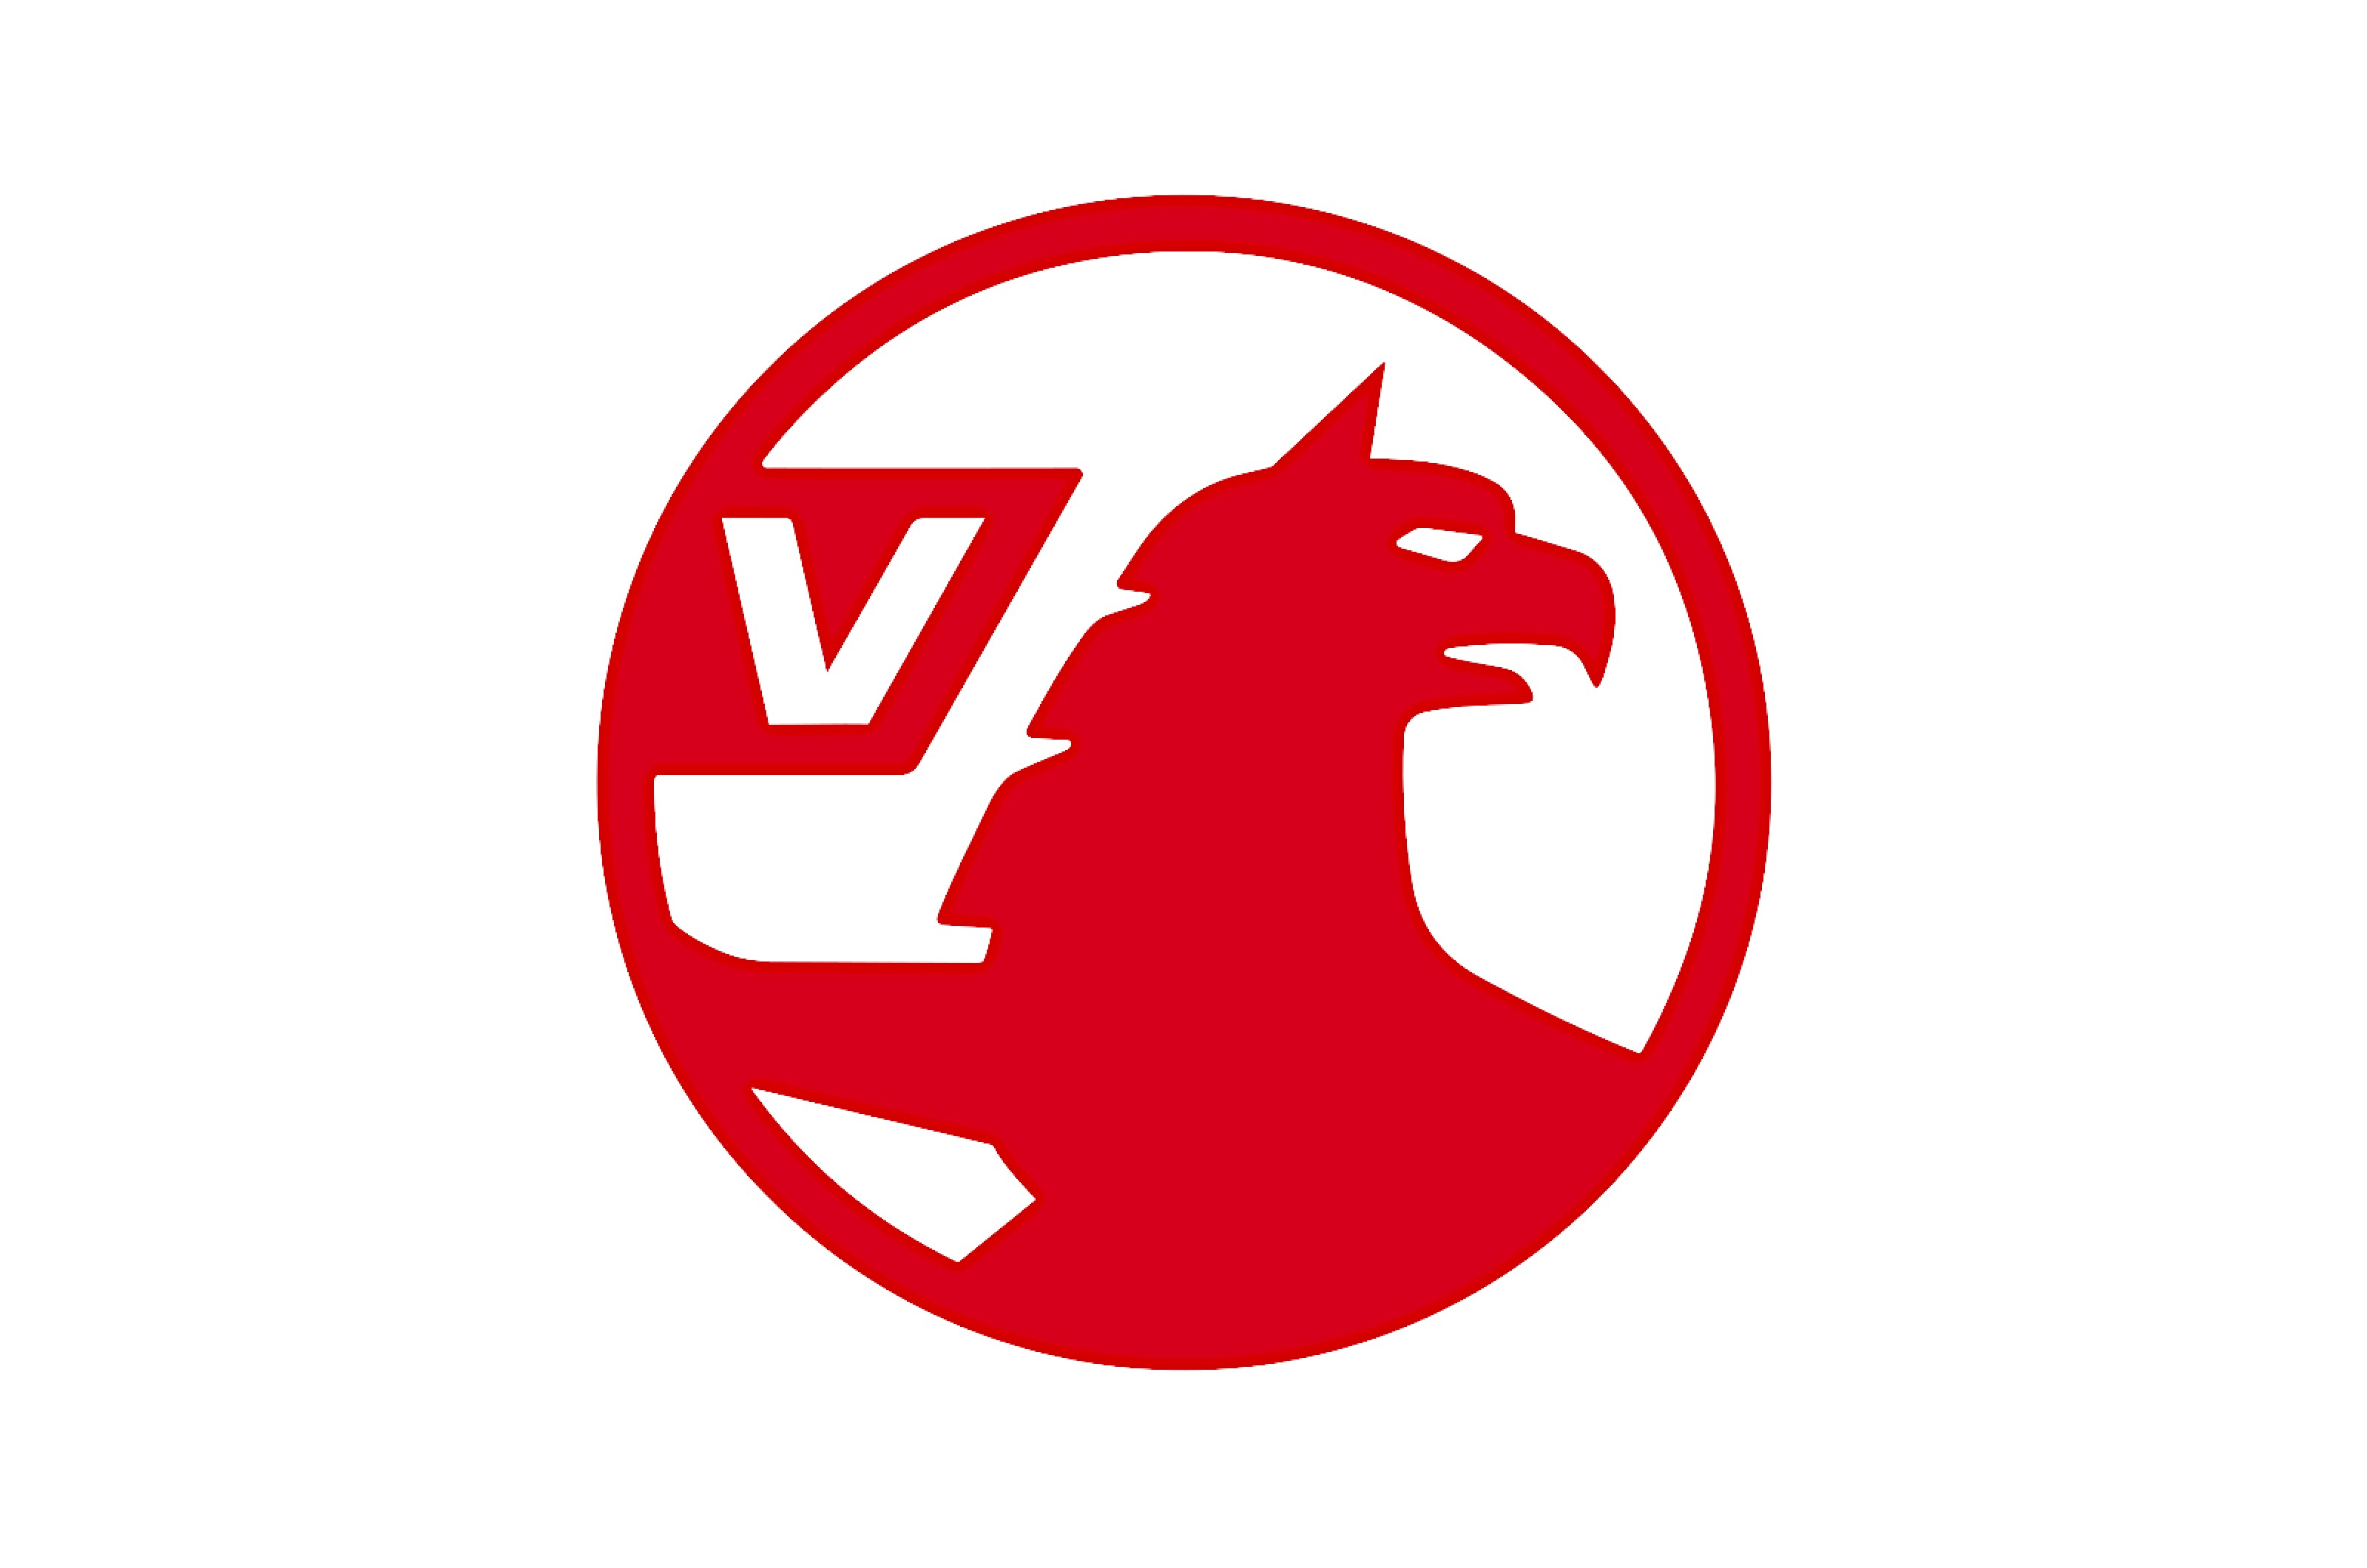 <p>Vauxhall’s logo has always included a mythical cross between a lion and an eagle known as a griffin.</p>  <p>It’s often said that the griffin was included on the coat of arms of Sir Falkes de Breauté (many other spellings are available), from whose name Vauxhall was derived by a very complicated process, but there is some uncertainty about this.</p>  <p>Anyway, the griffin has been there for over a century, always carrying a flag with the letter V on it.</p>  <p>The logo has been altered many times, in shape, color and apparent number of dimensions. Since you’ve read this far, you won’t be surprised to learn that it became much flatter, and was reduced to a single color, in 2020.</p>